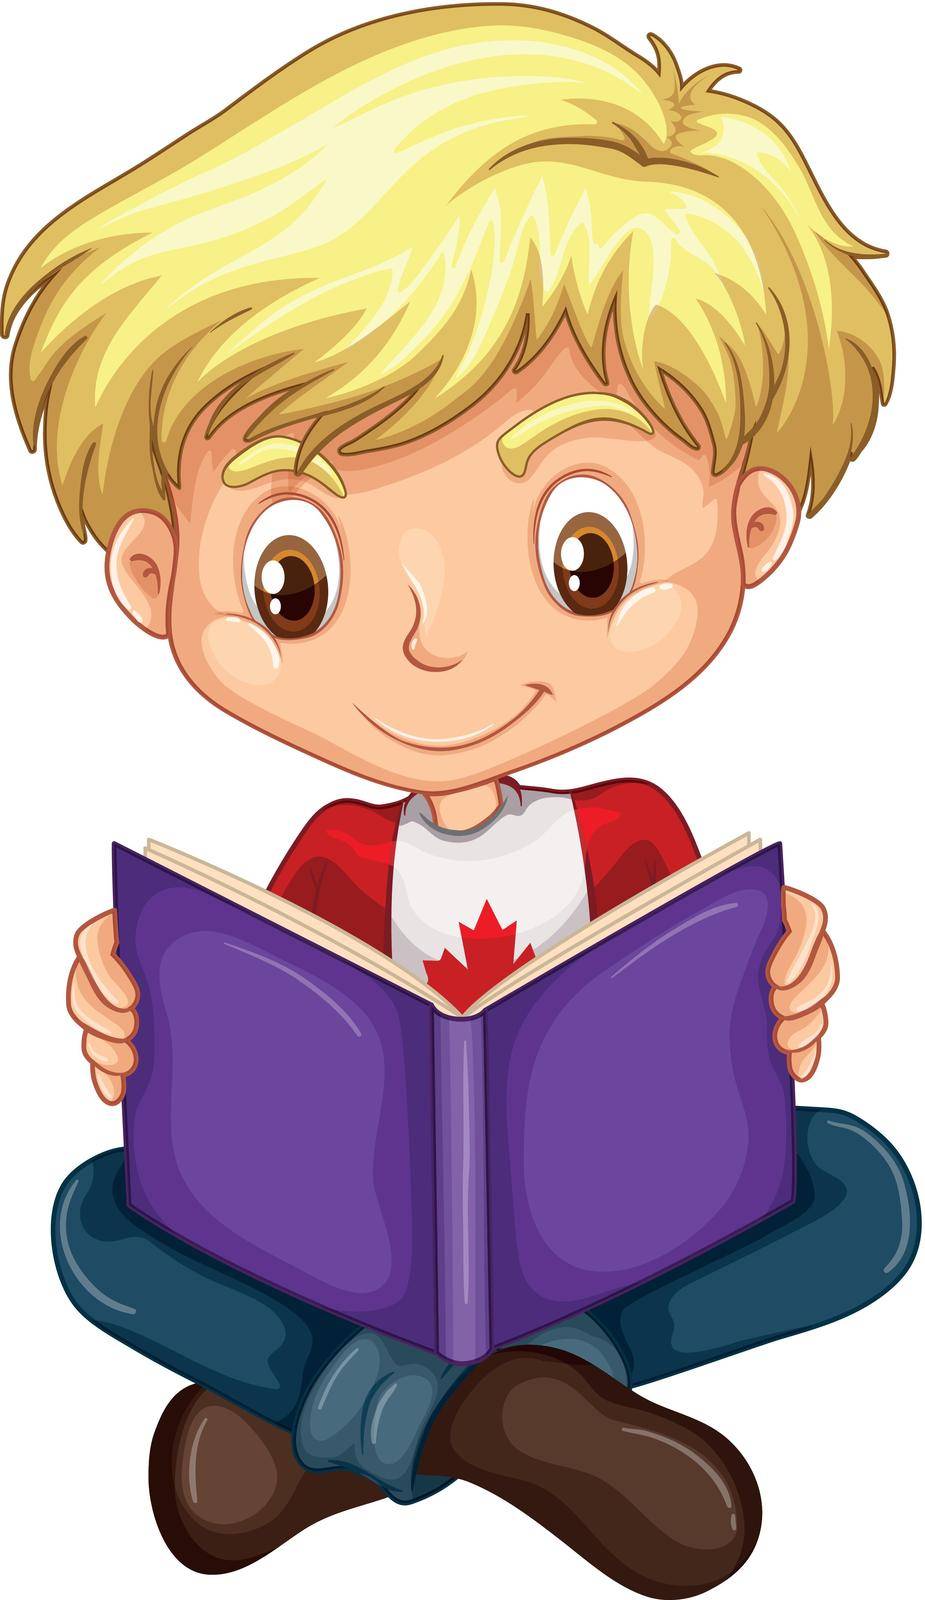 Canadian boy reading a book by iimages